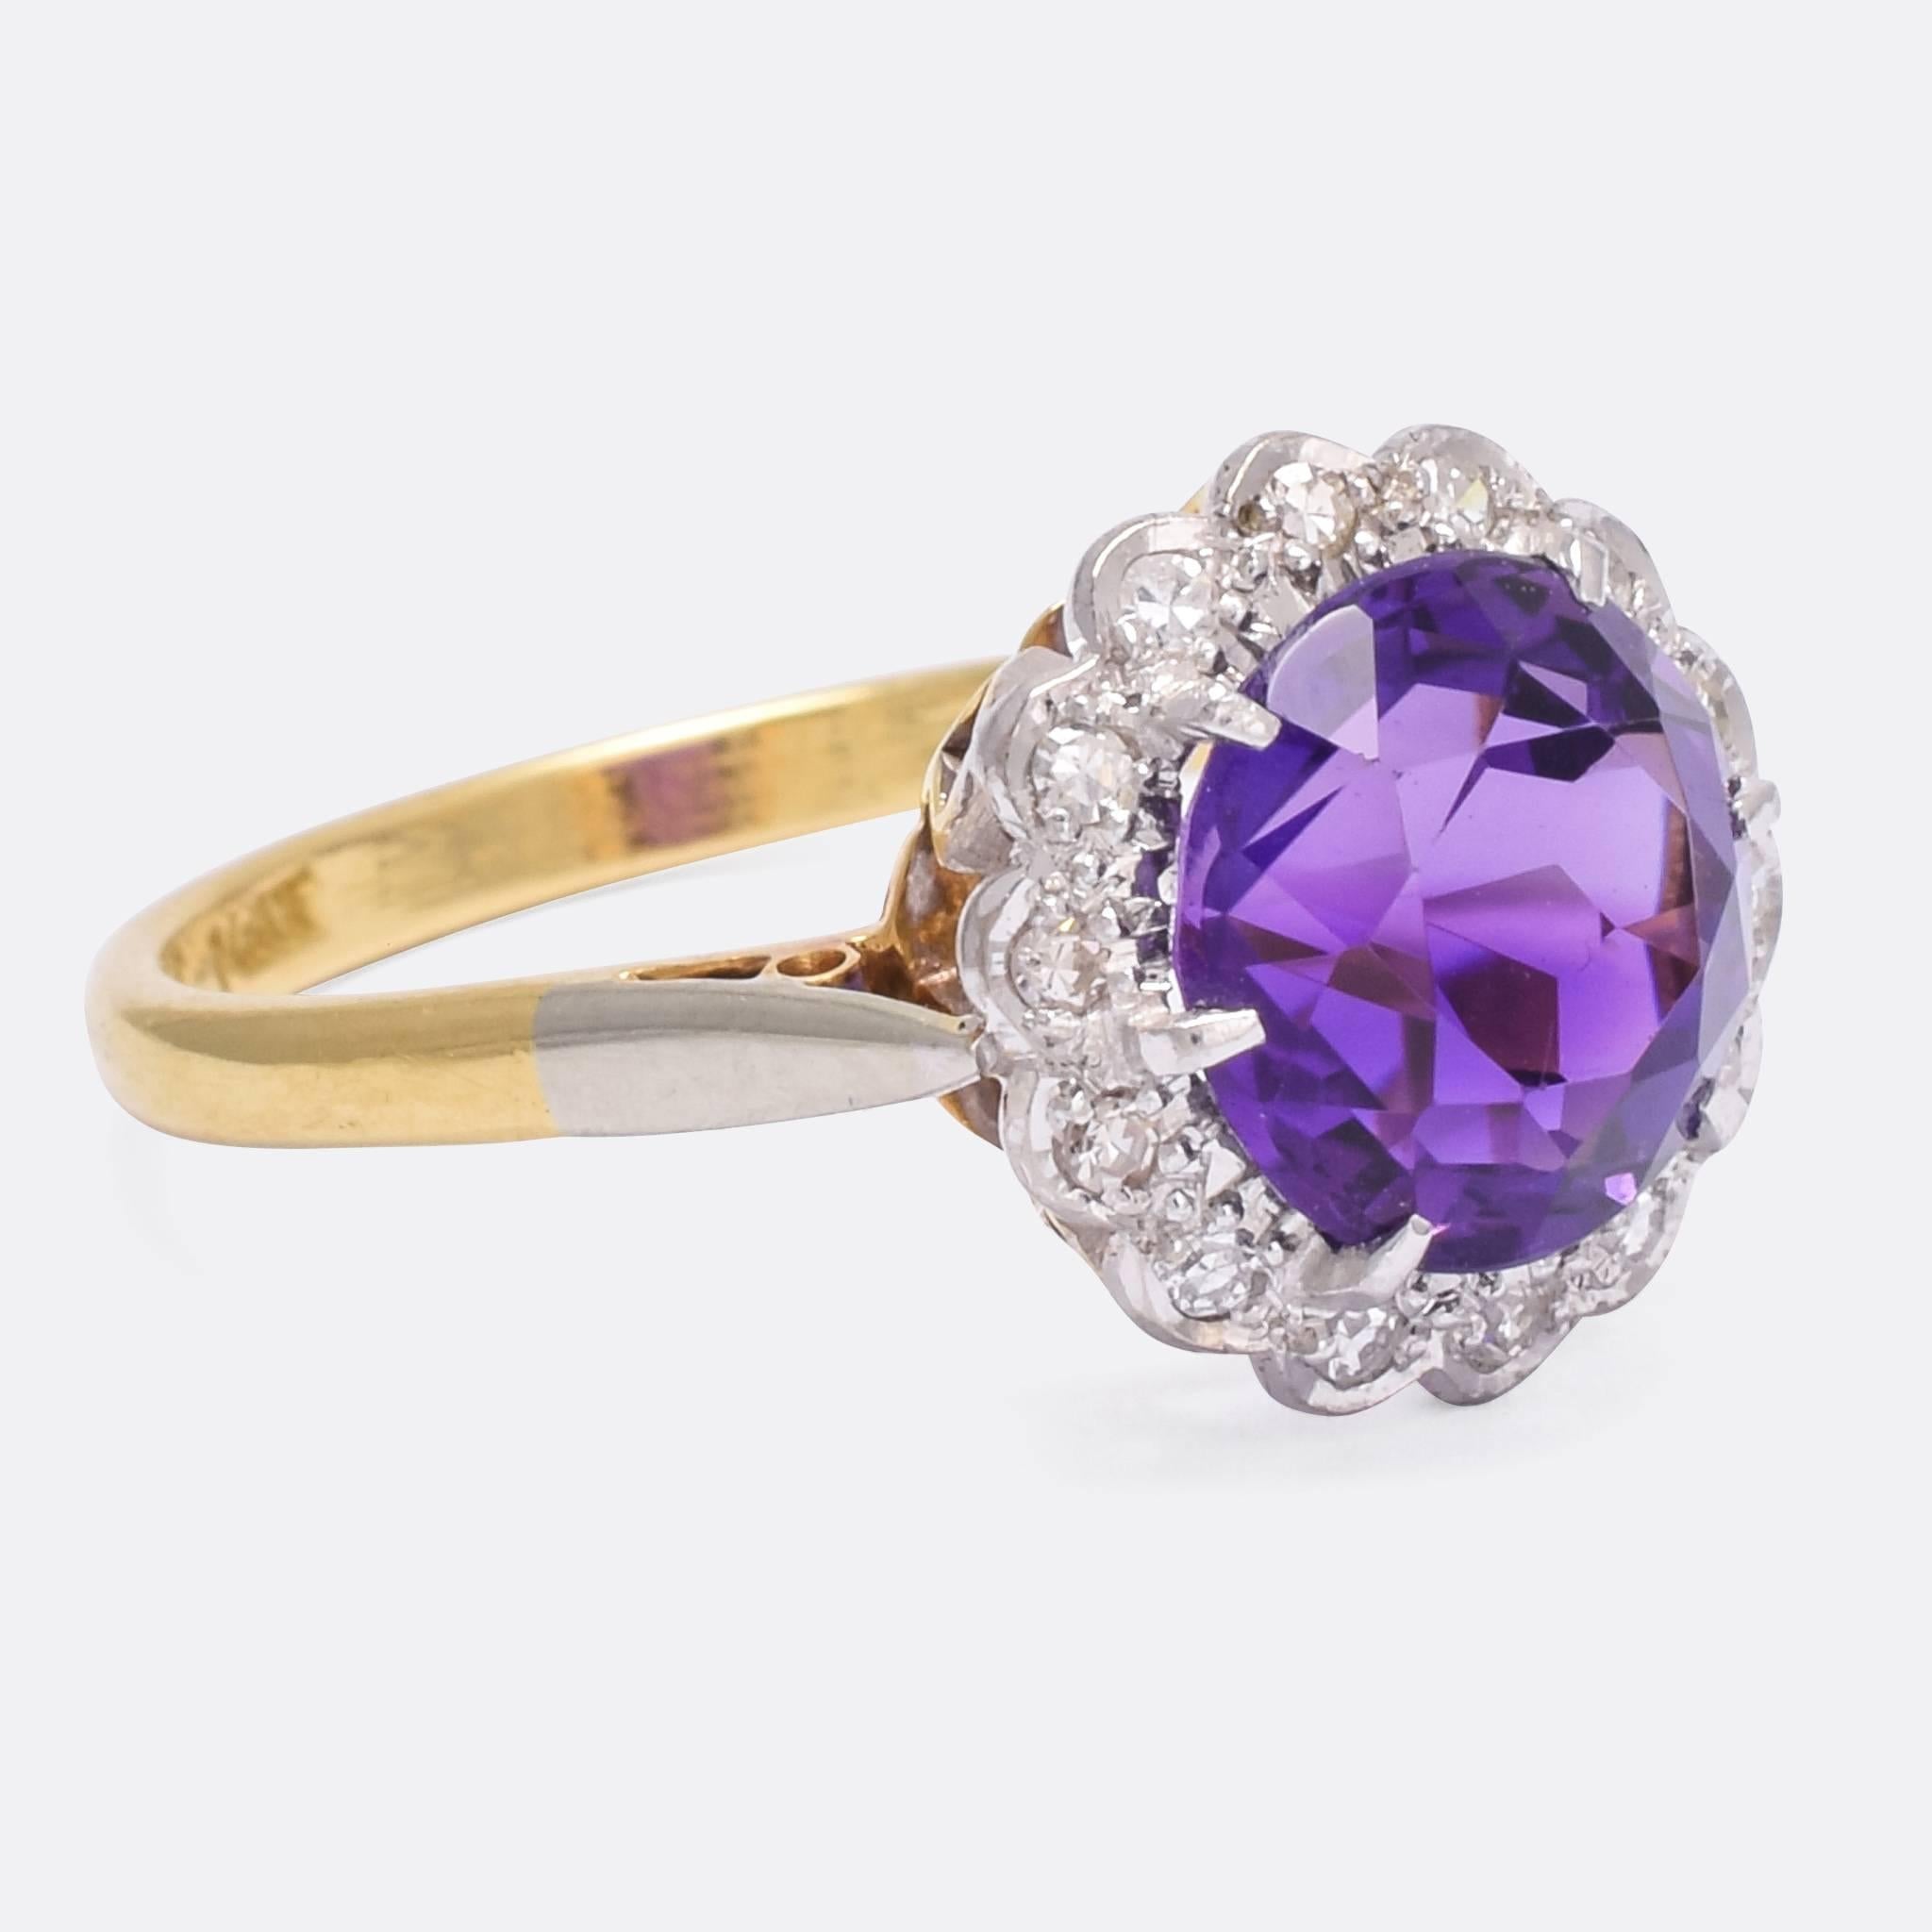 A lovely Art Deco era cluster ring, set with a vibrant Siberian Amethyst within a halo of platinum and diamonds. The ring features an unusual pierced gallery, that not only looks awesome, but allows light in behind the stones - further enhancing